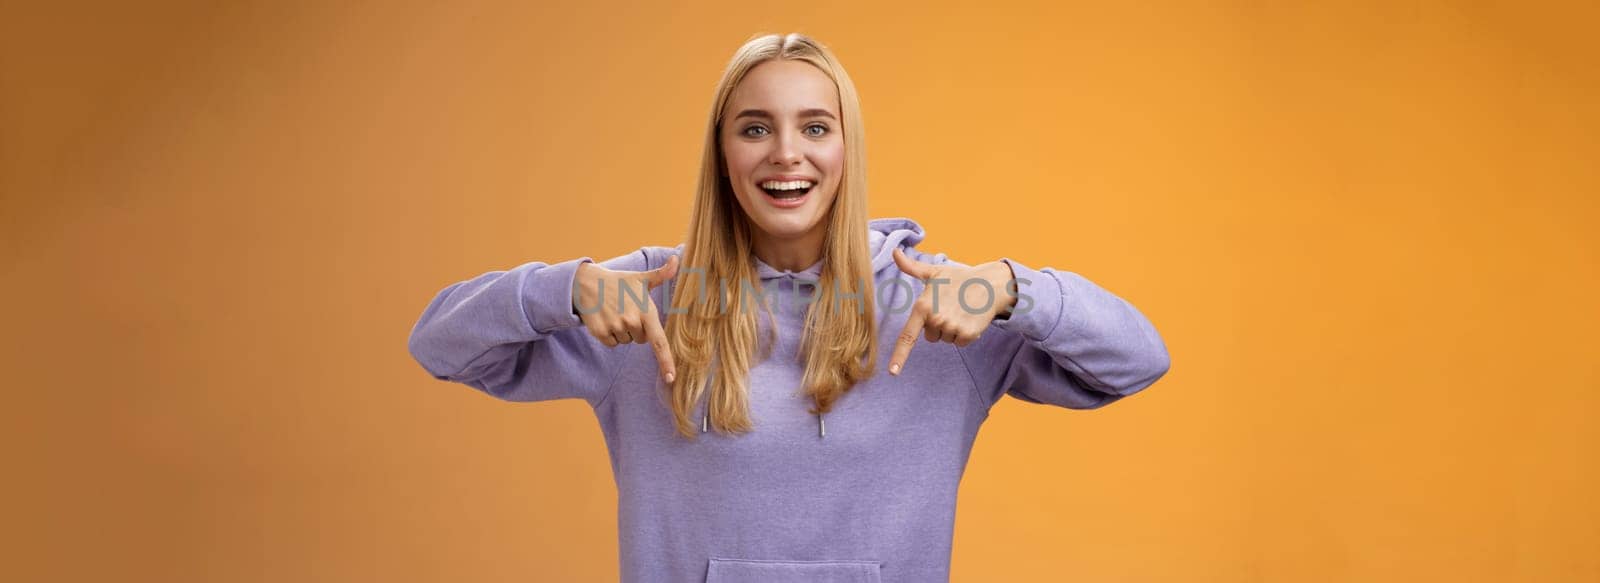 Amused joyful nice blond girlfriend pointing down present cool new product smiling broadly recommending try check out standing orange background happily grinning in hoodie. Advertisement concept